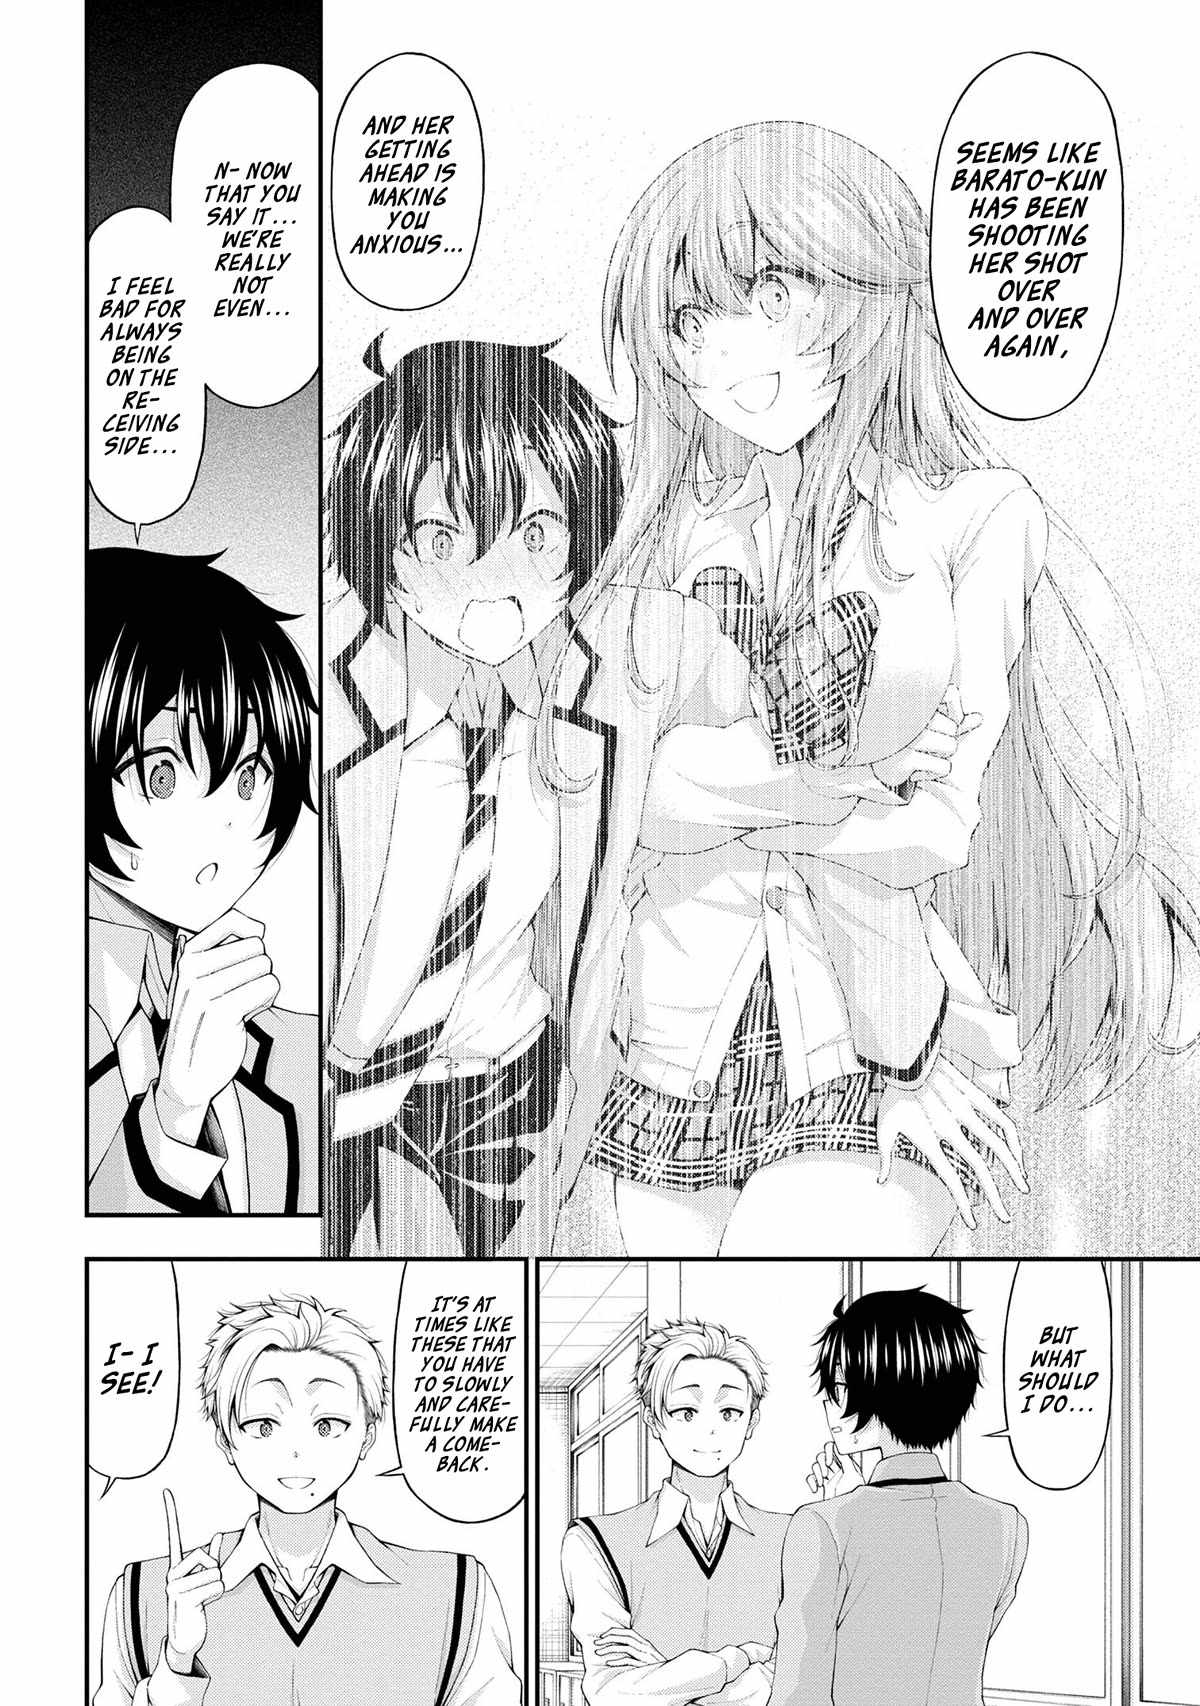 The Gal Who Was Meant to Confess to Me as a Game Punishment Has Apparently Fallen in Love with Me Chapter 13-eng-li - Page 21